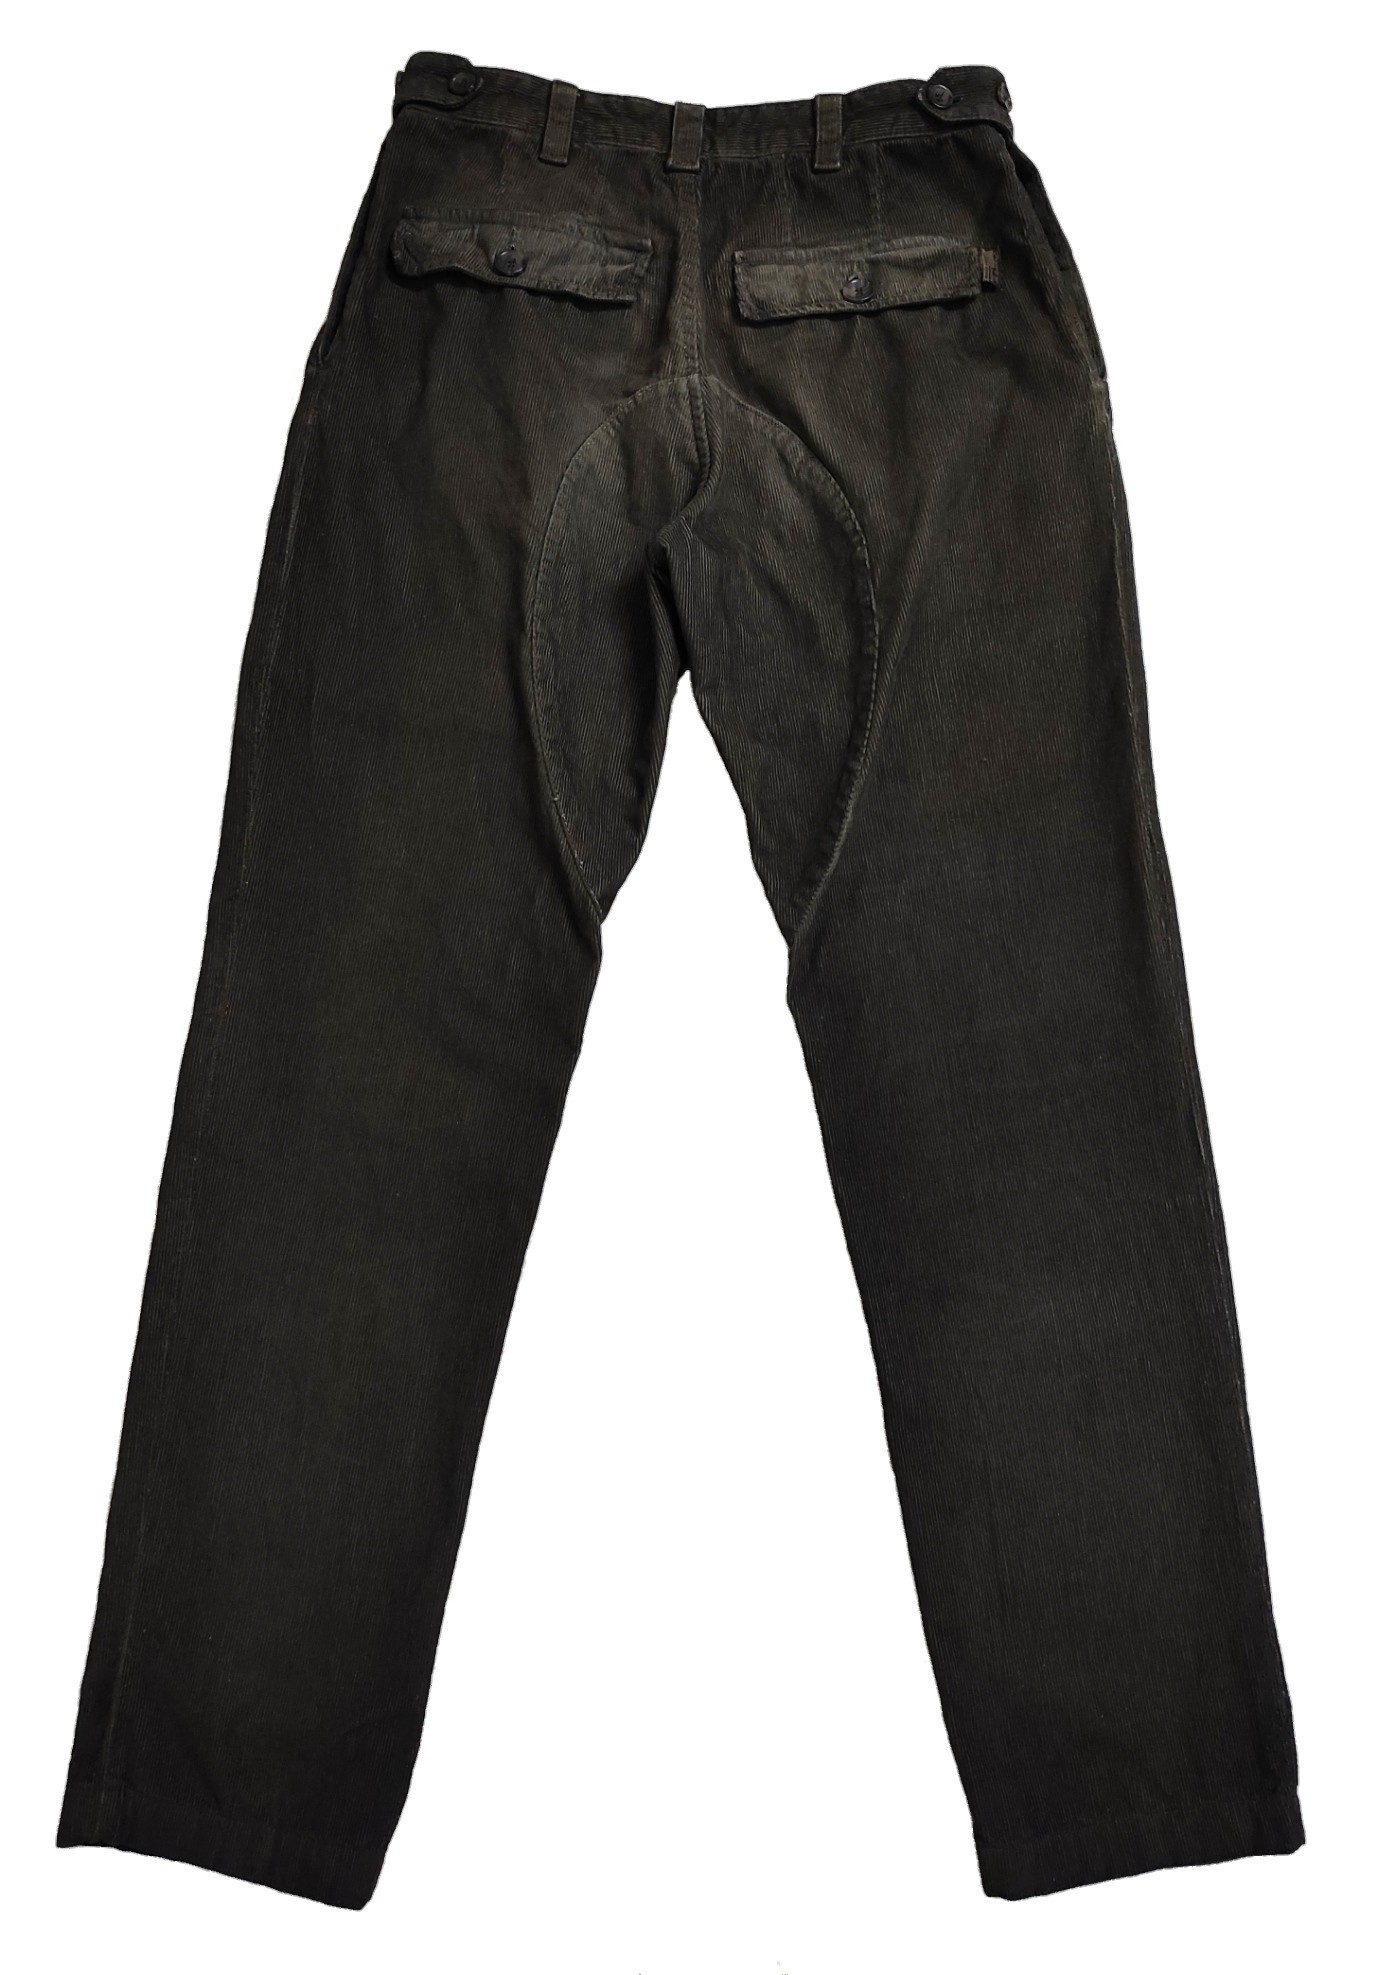 AW2003 Dolce and Gabbana pocket cargo military pants - 2